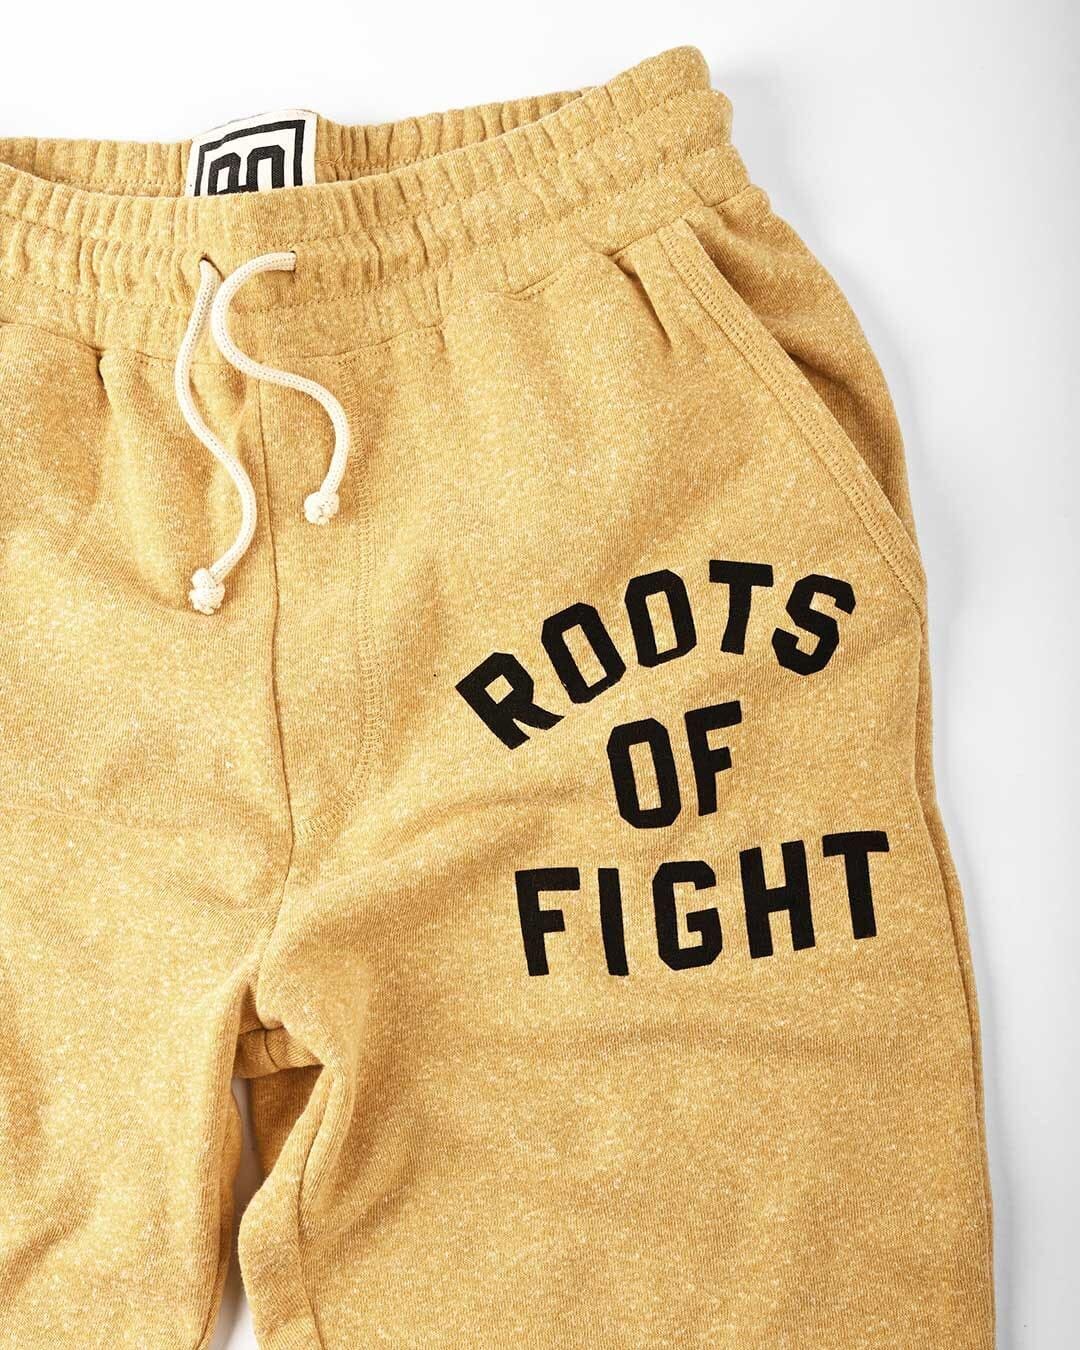 Roots of Fight Super Soft Yellow Sweatpants - Roots of Fight